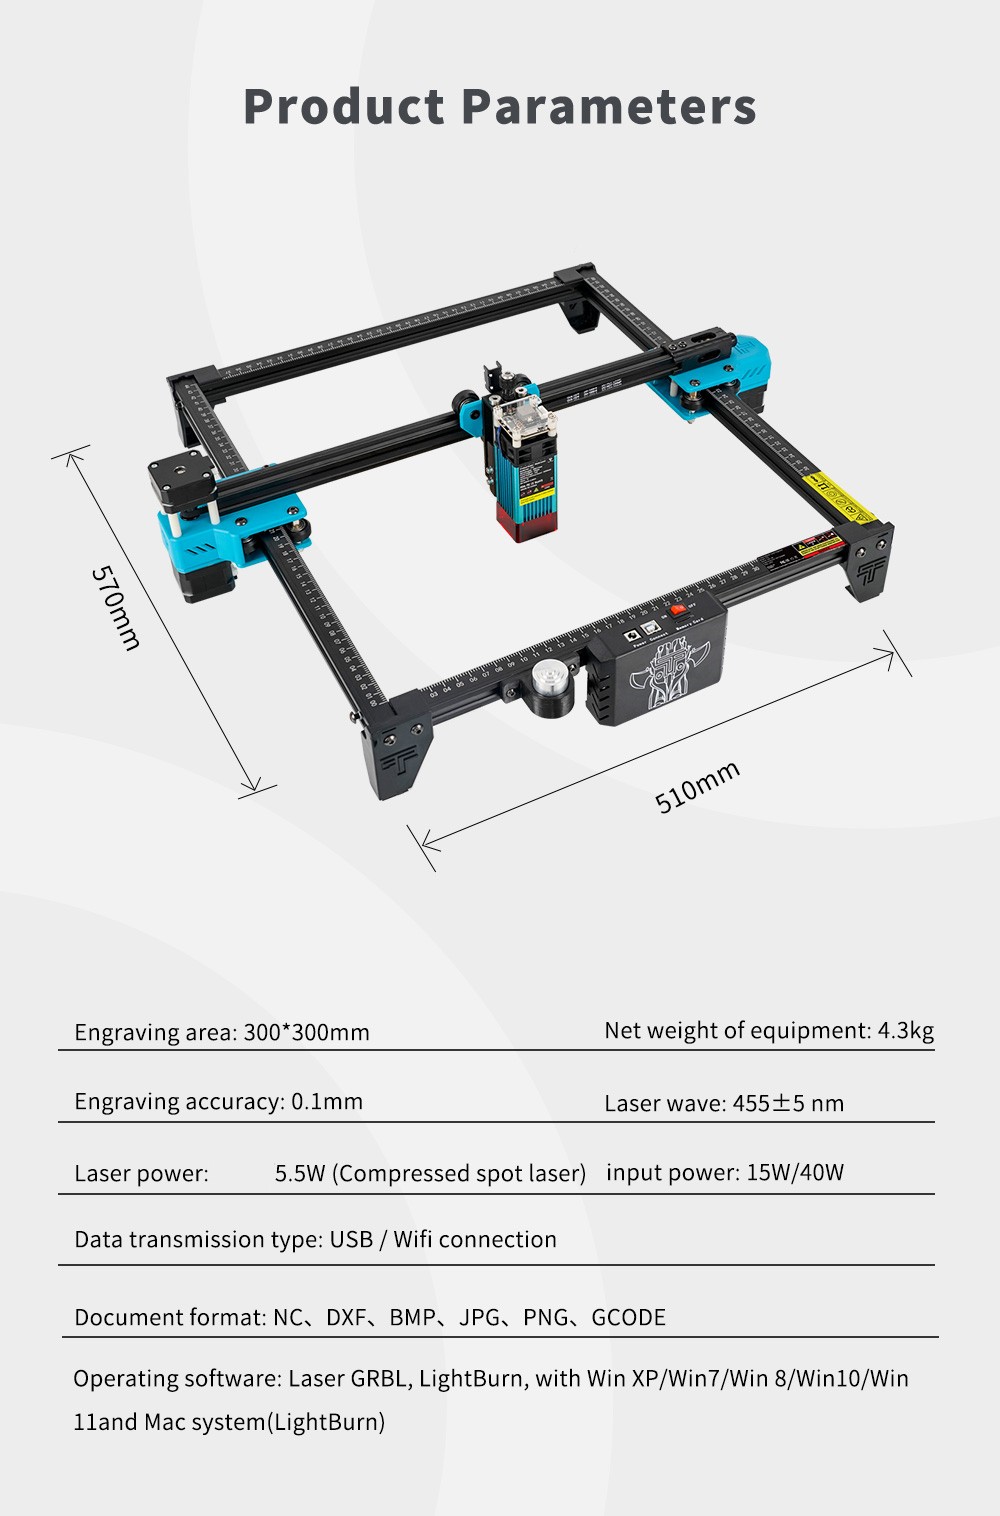 Two Trees TTS 20W Laser Engraver Cutter Metall CNC Laser Stecher Machine Engraving Area 300x300mm